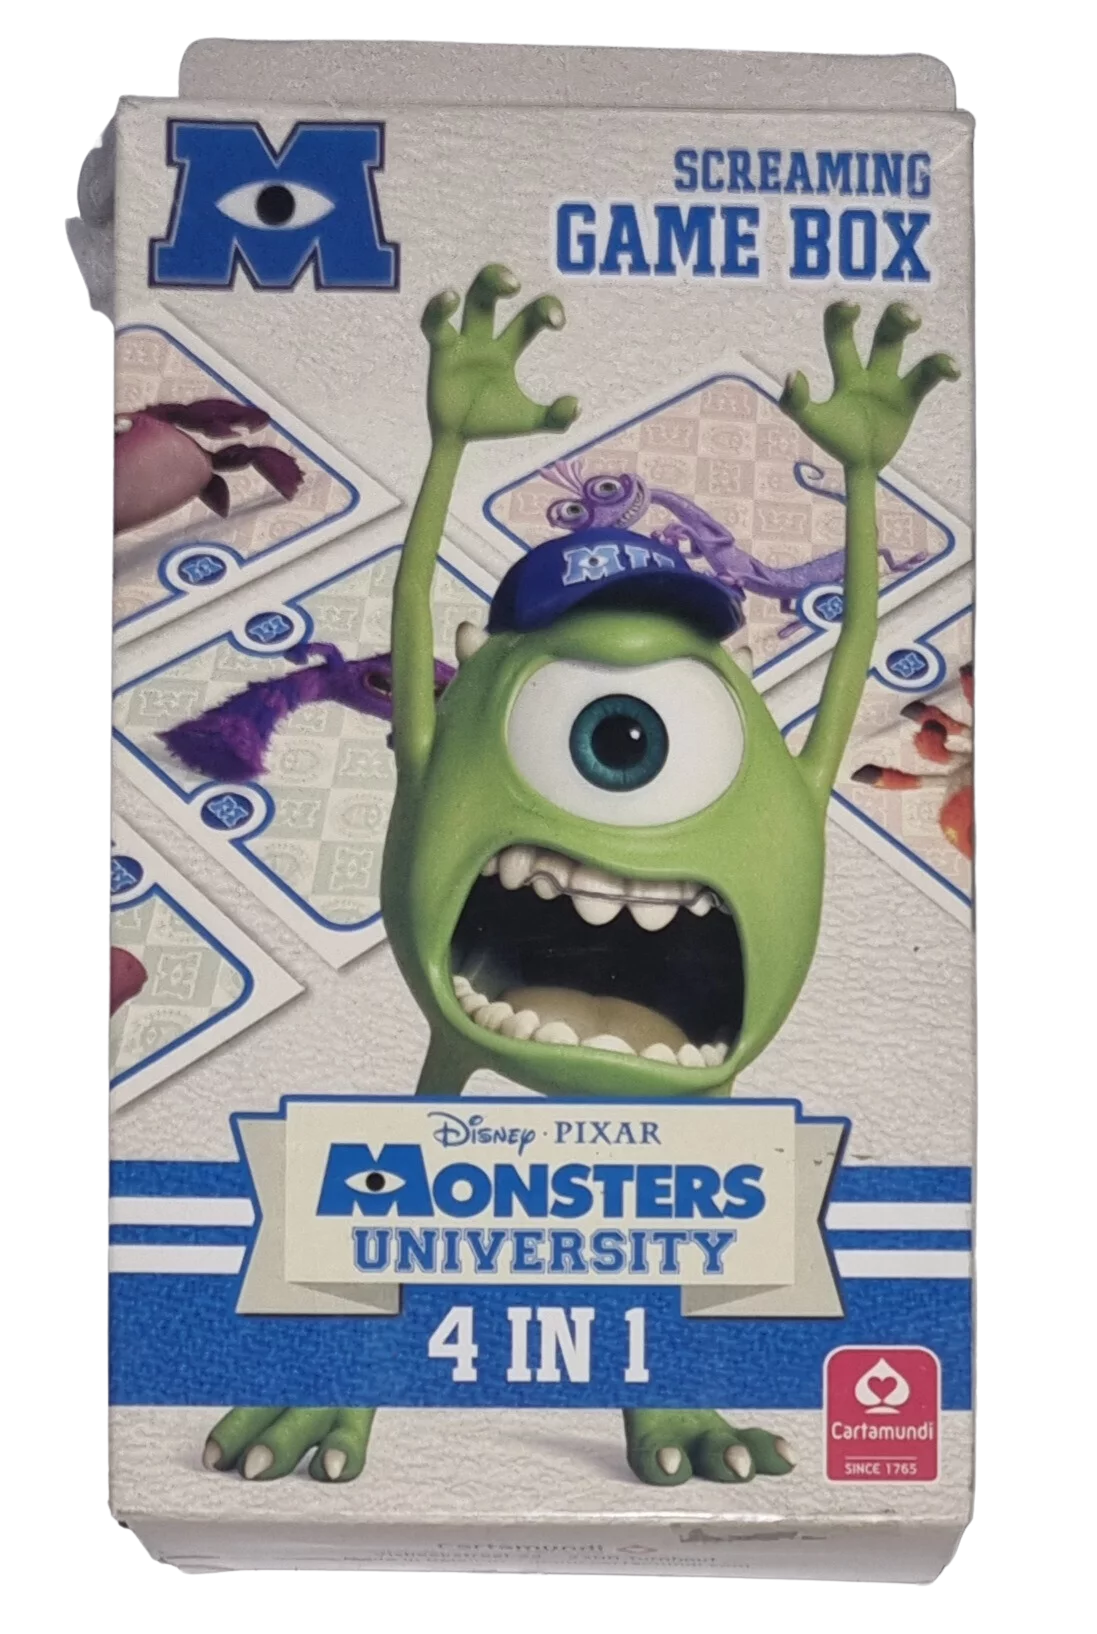 ASS Screaming Game Box Monsters University 4 in 1 